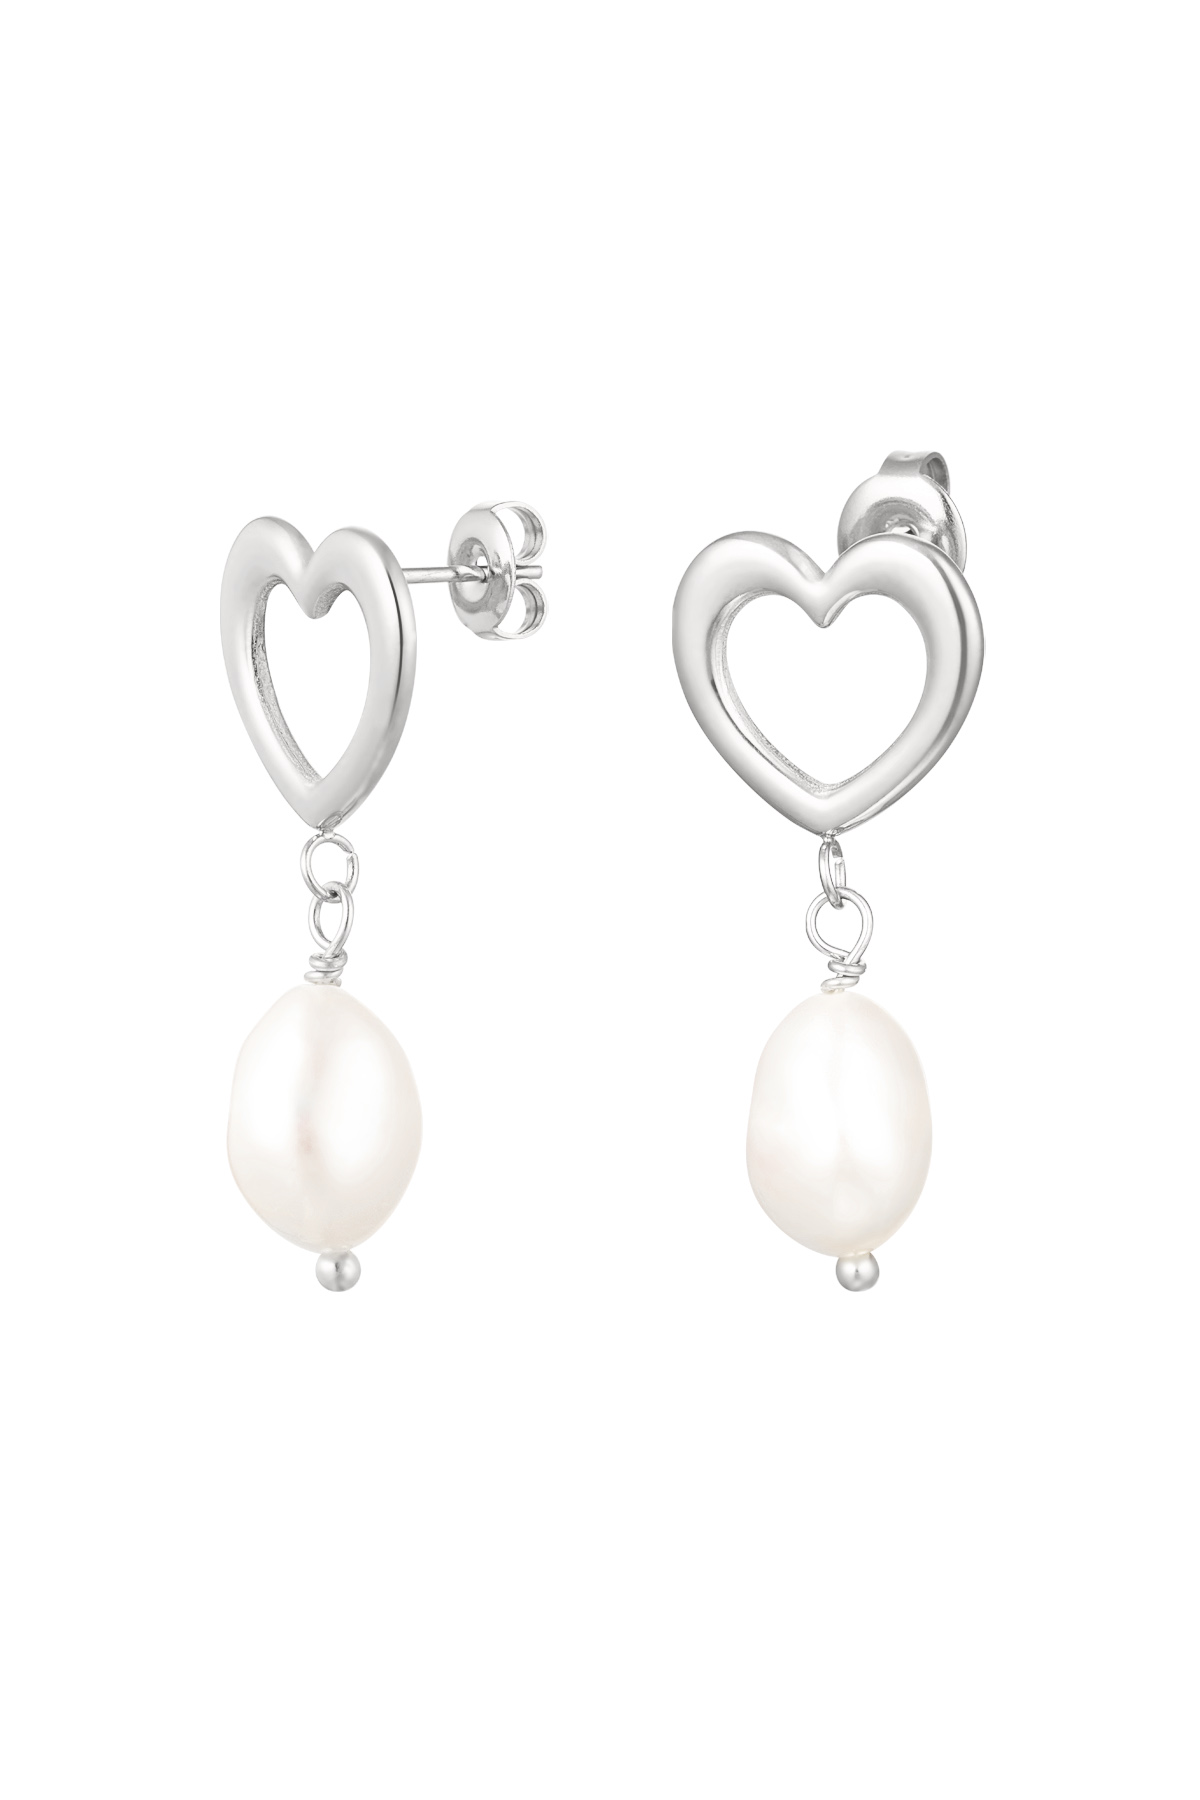 Earring heart with pearl detail - silver stainless steel 